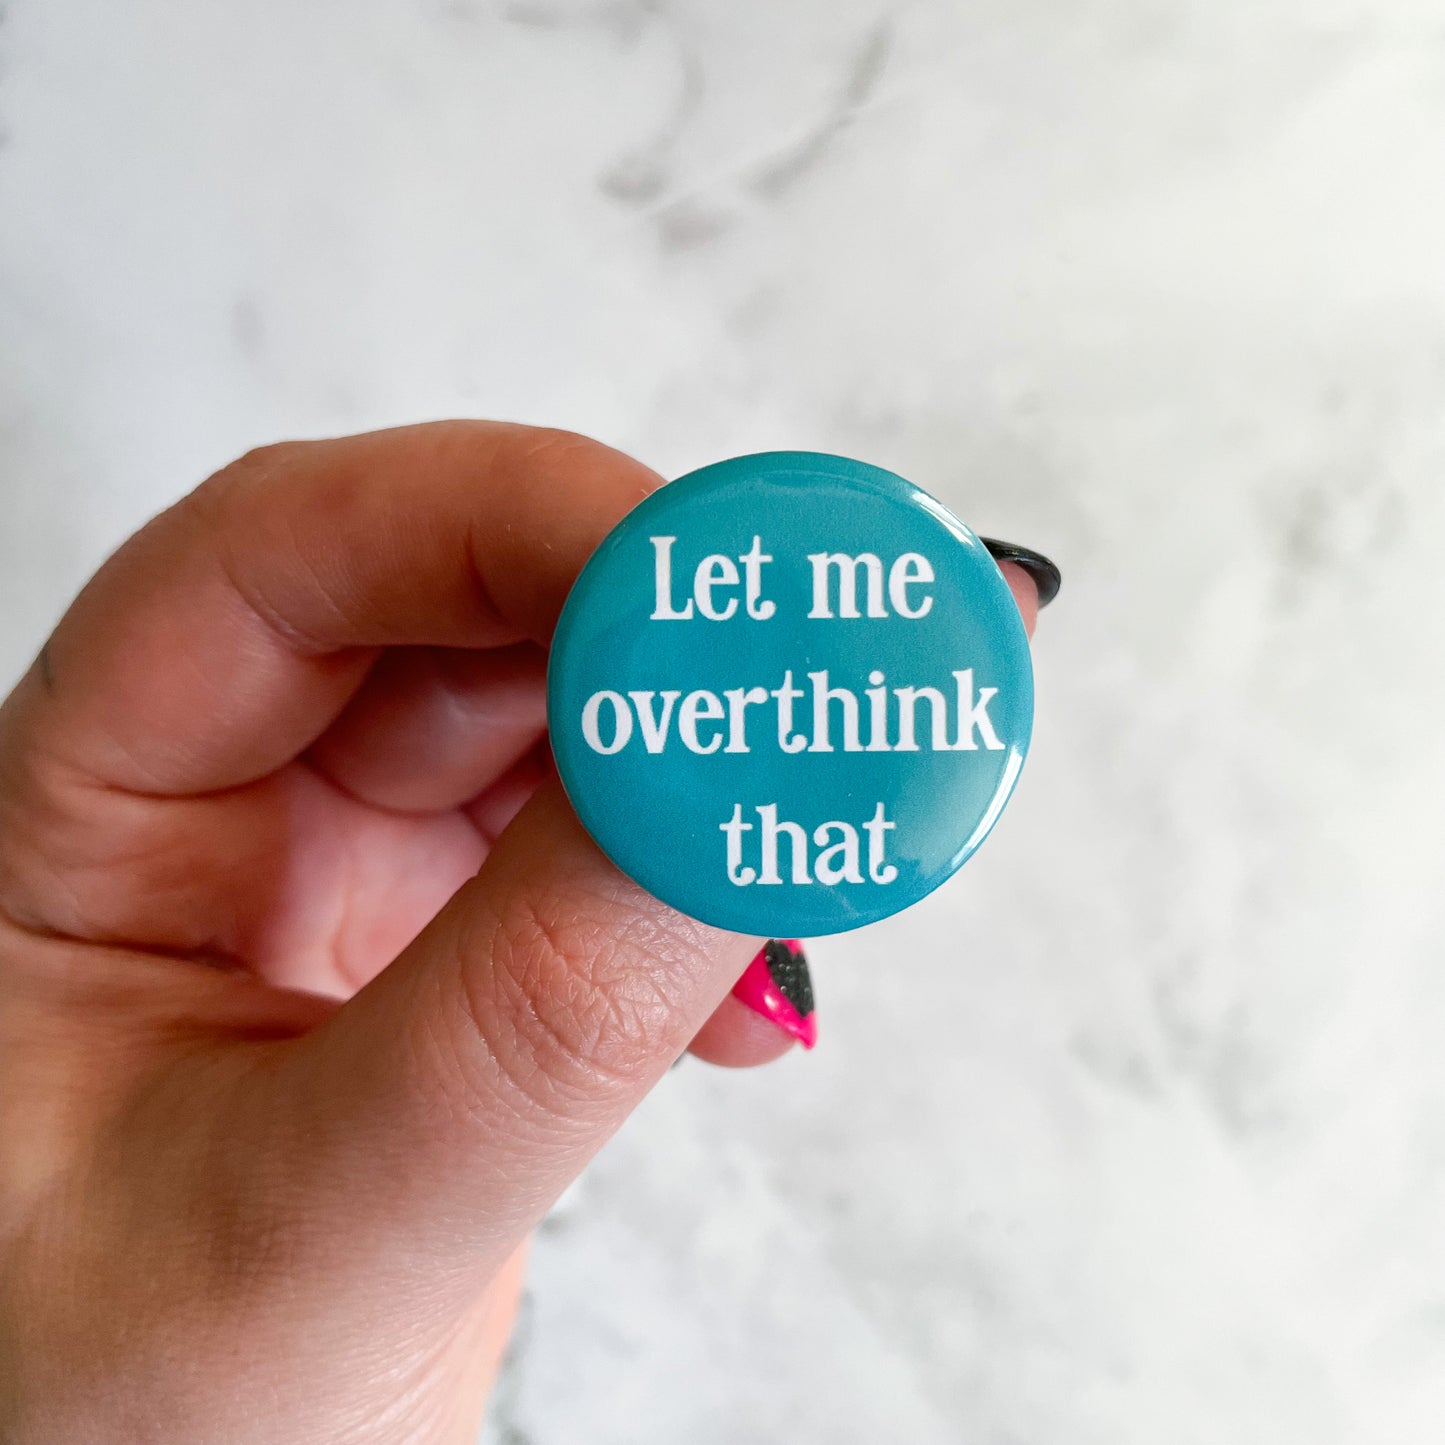 Let Me Overthink That Button / Badge (Buy 4 Get 1 FREE)